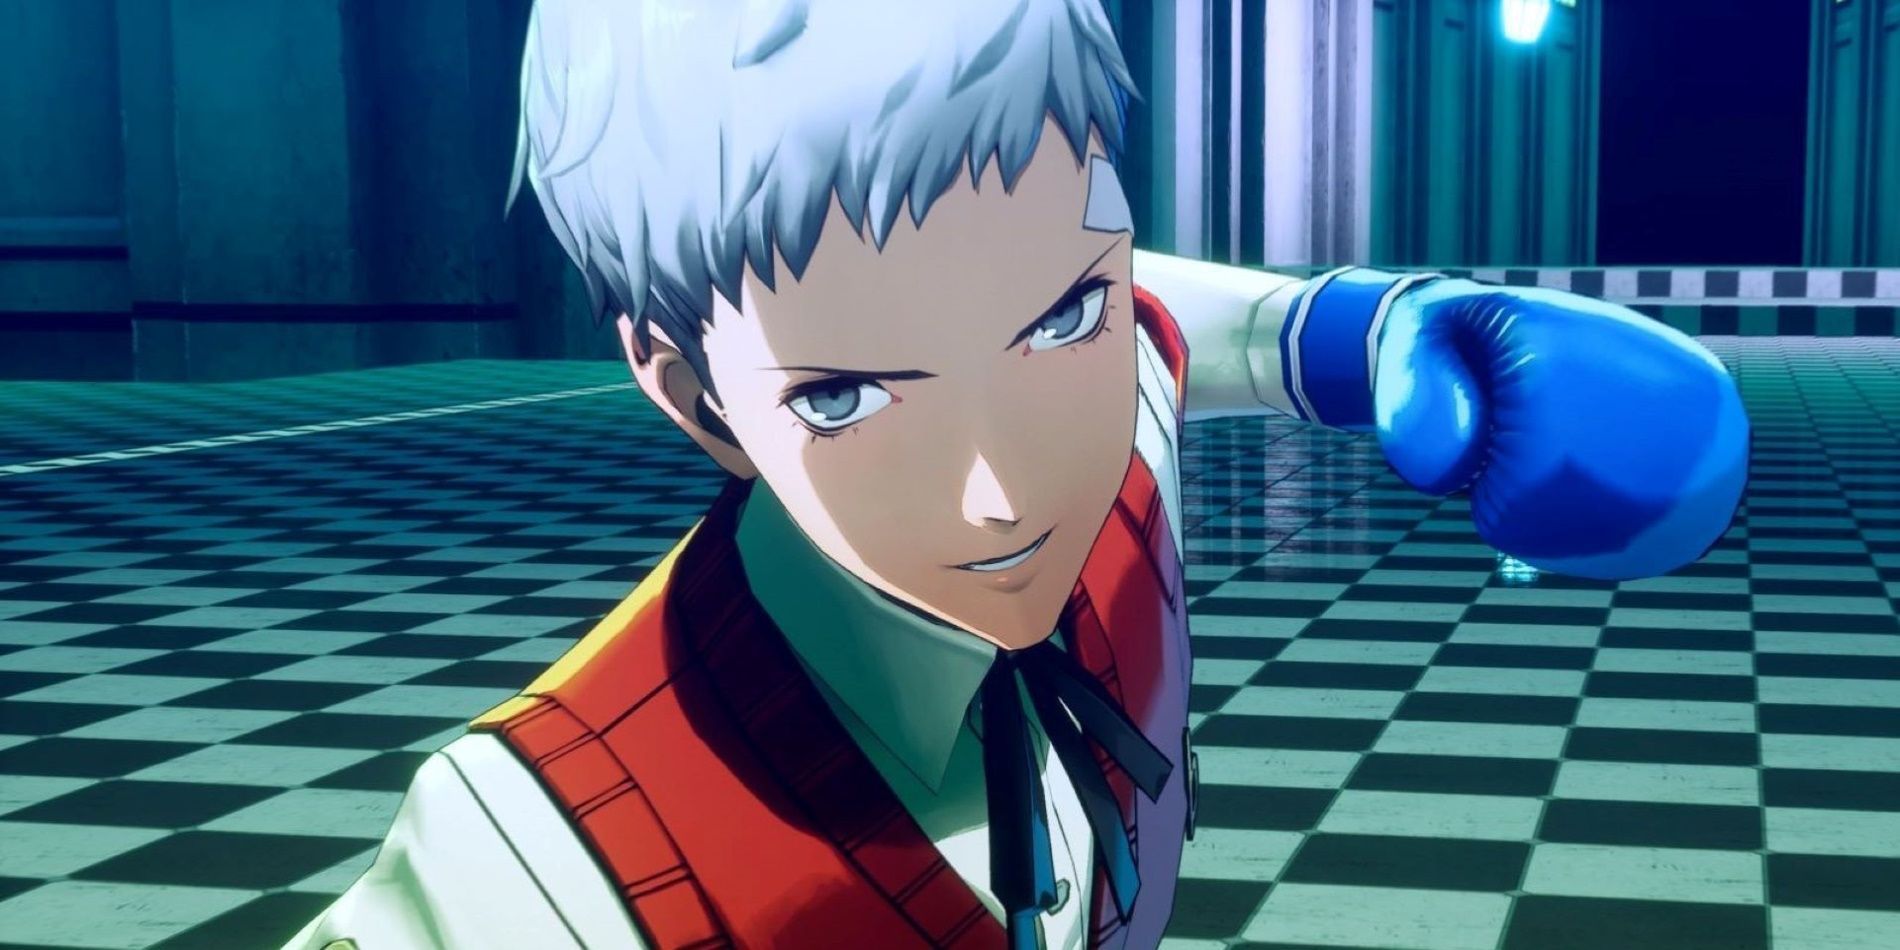 Akihiko winds up a punch with a blue boxing glove in a screenshot from Persona 3 Reload.